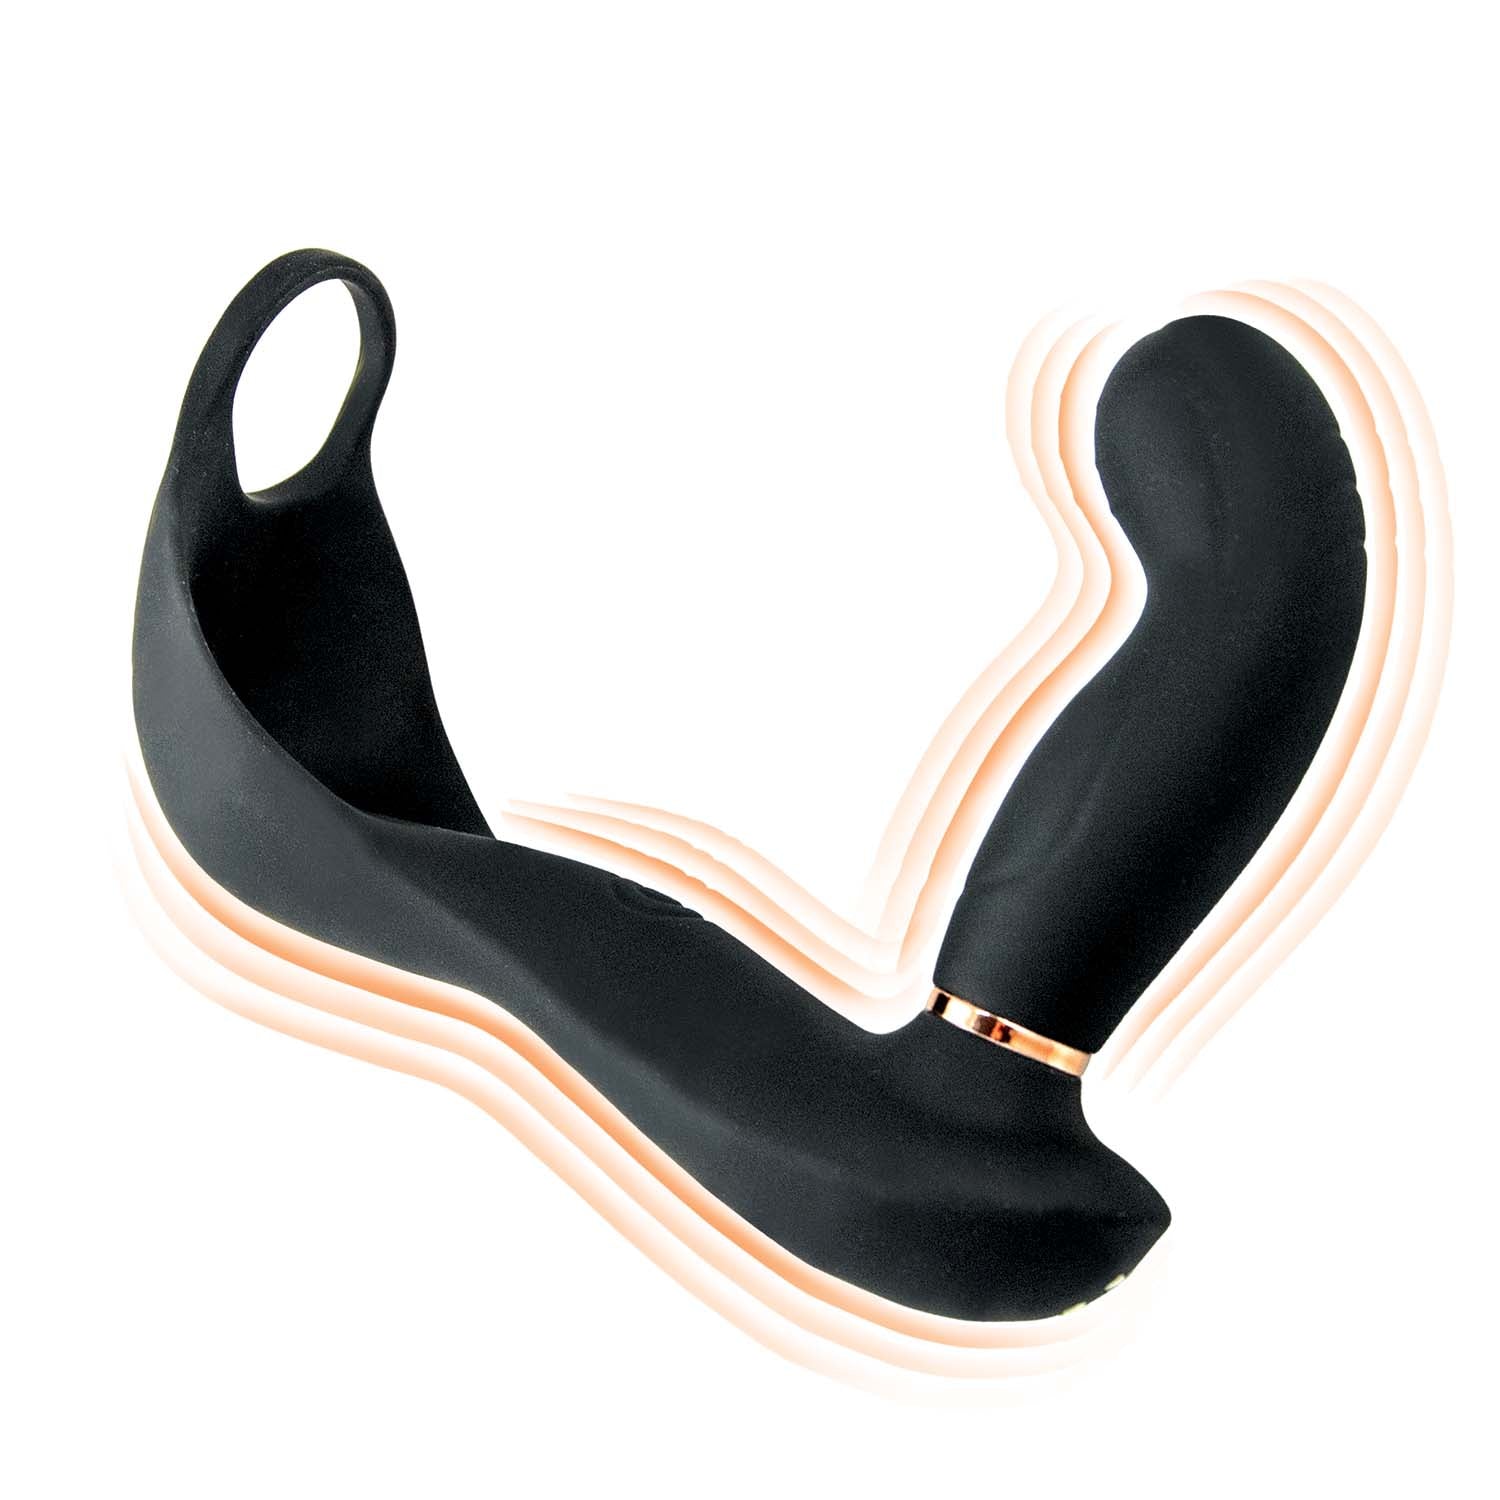 Butts Up Rechargeable P-spot Anal Massager Pro - Black